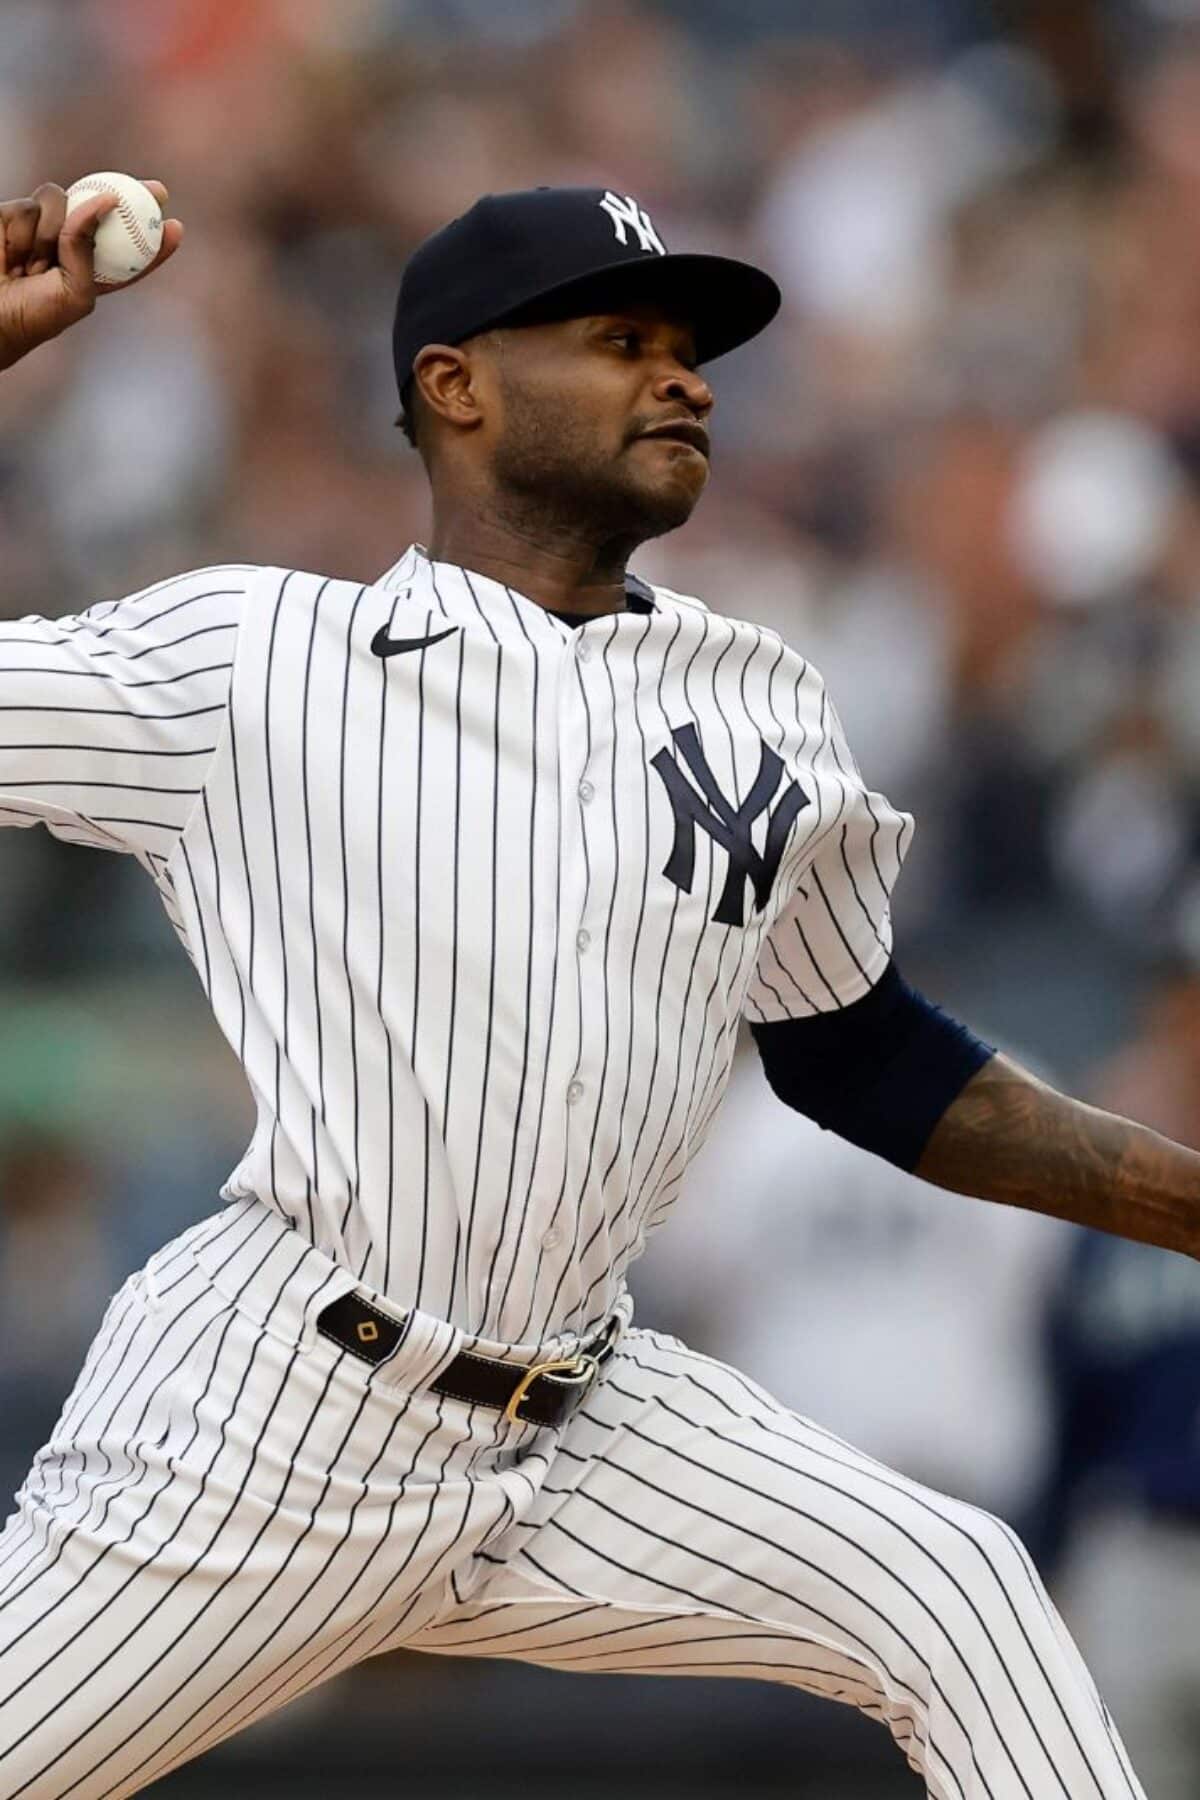 NEW YORK, NEW YORK - JUNE 22: Domingo German #0 of the New York Yankees in action against the Seattle Mariners at Yankee Stadium on June 22, 2023 in the Bronx borough of New York City. The Mariners defeated the Yankees 10-2. (Photo by Jim McIsaac/Getty Images)